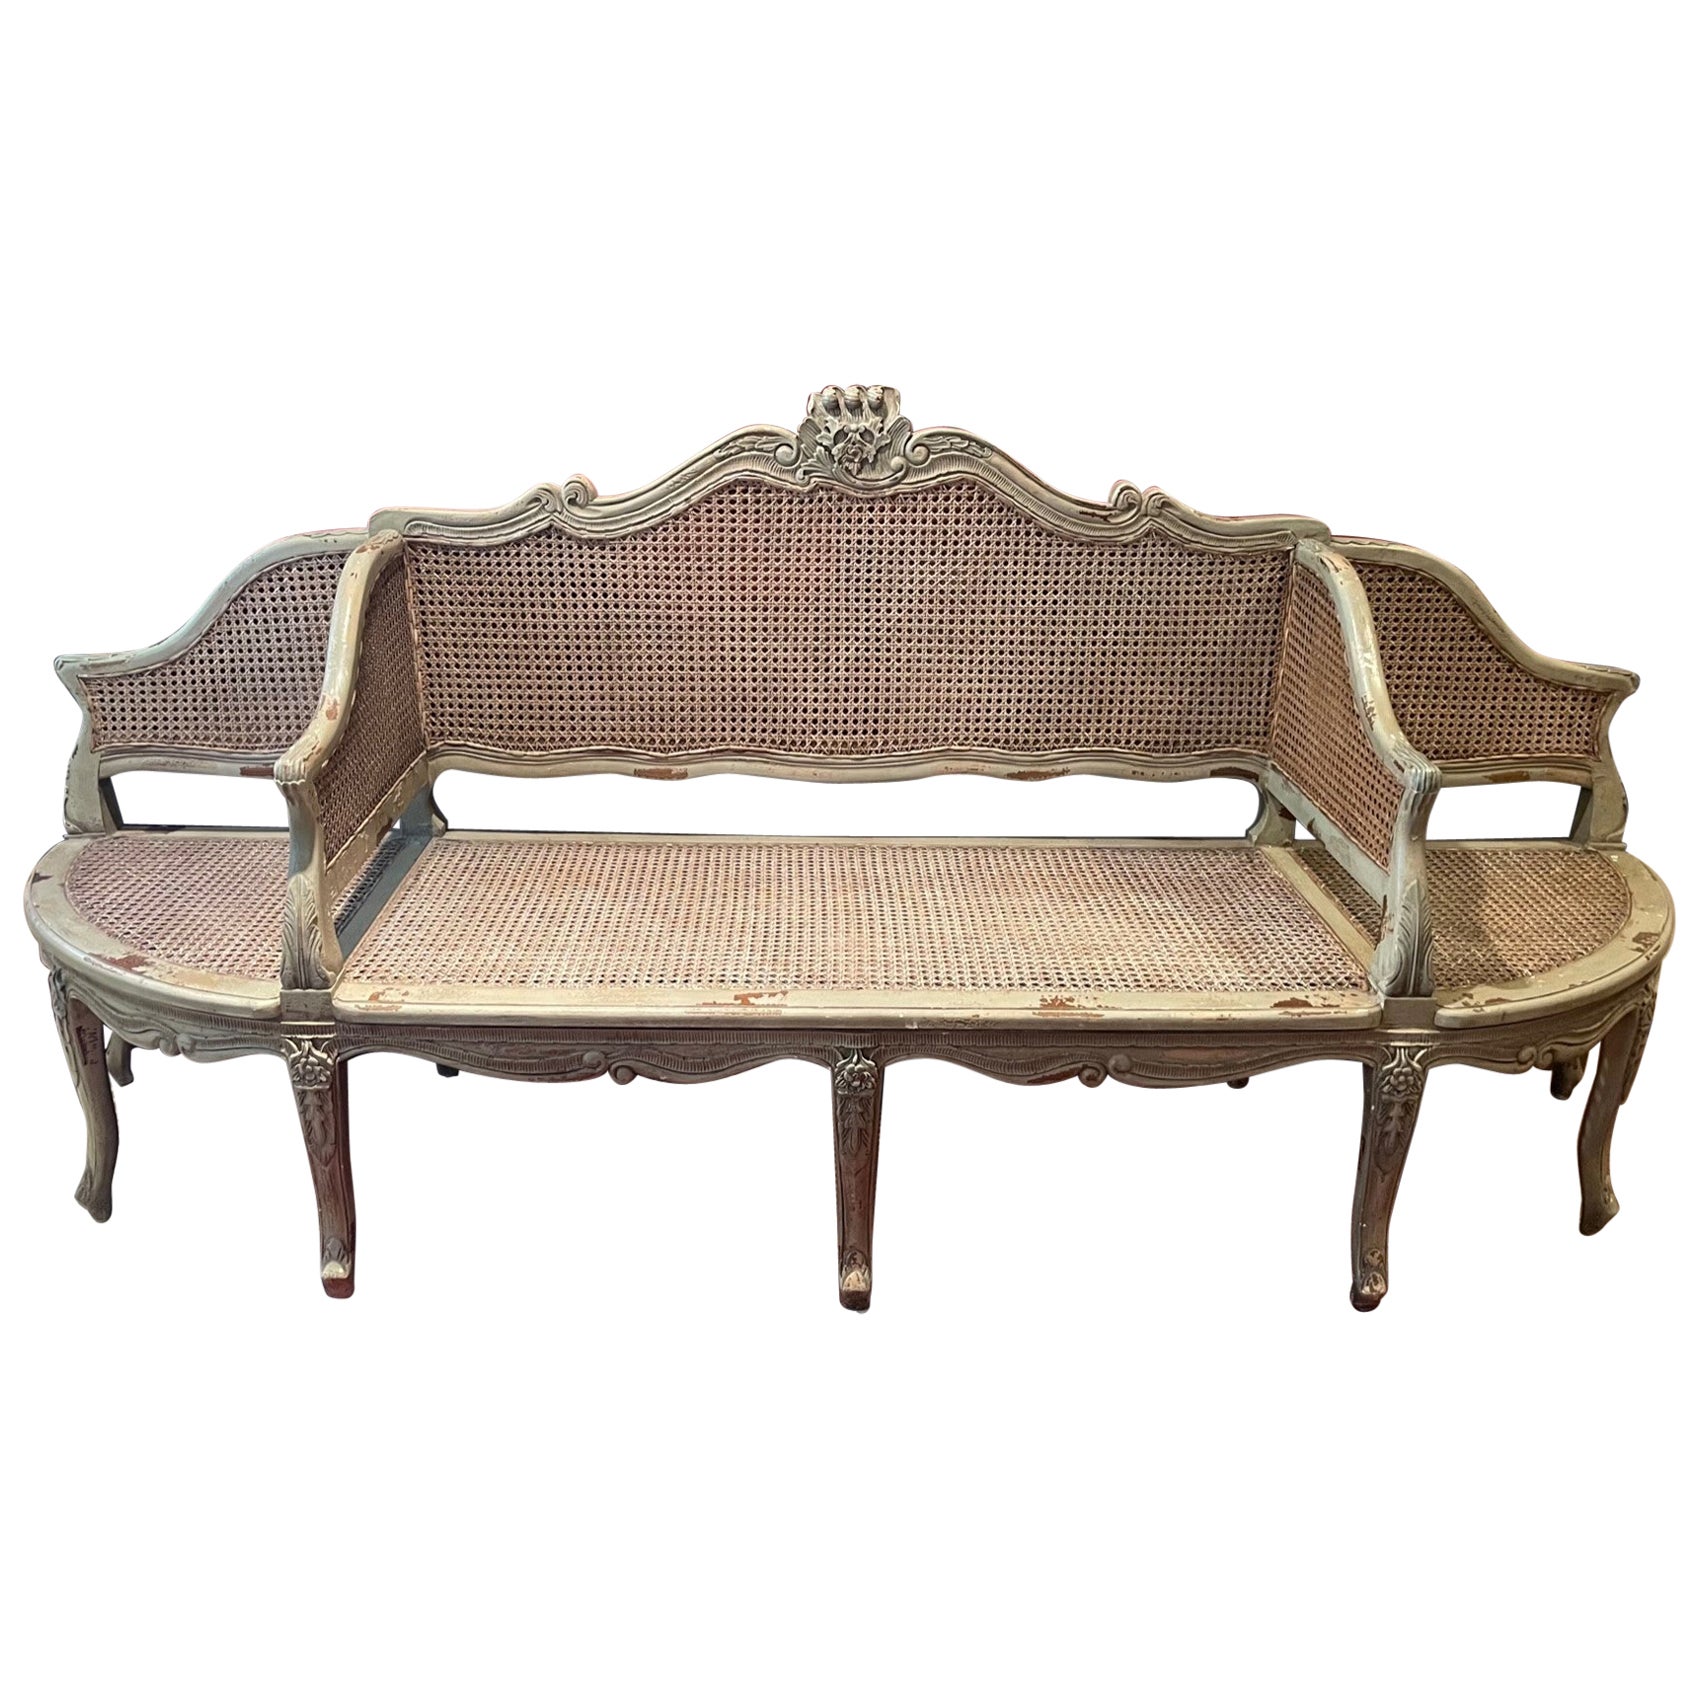 Late 19th Century French Caned Sofa, Canape a Confidents